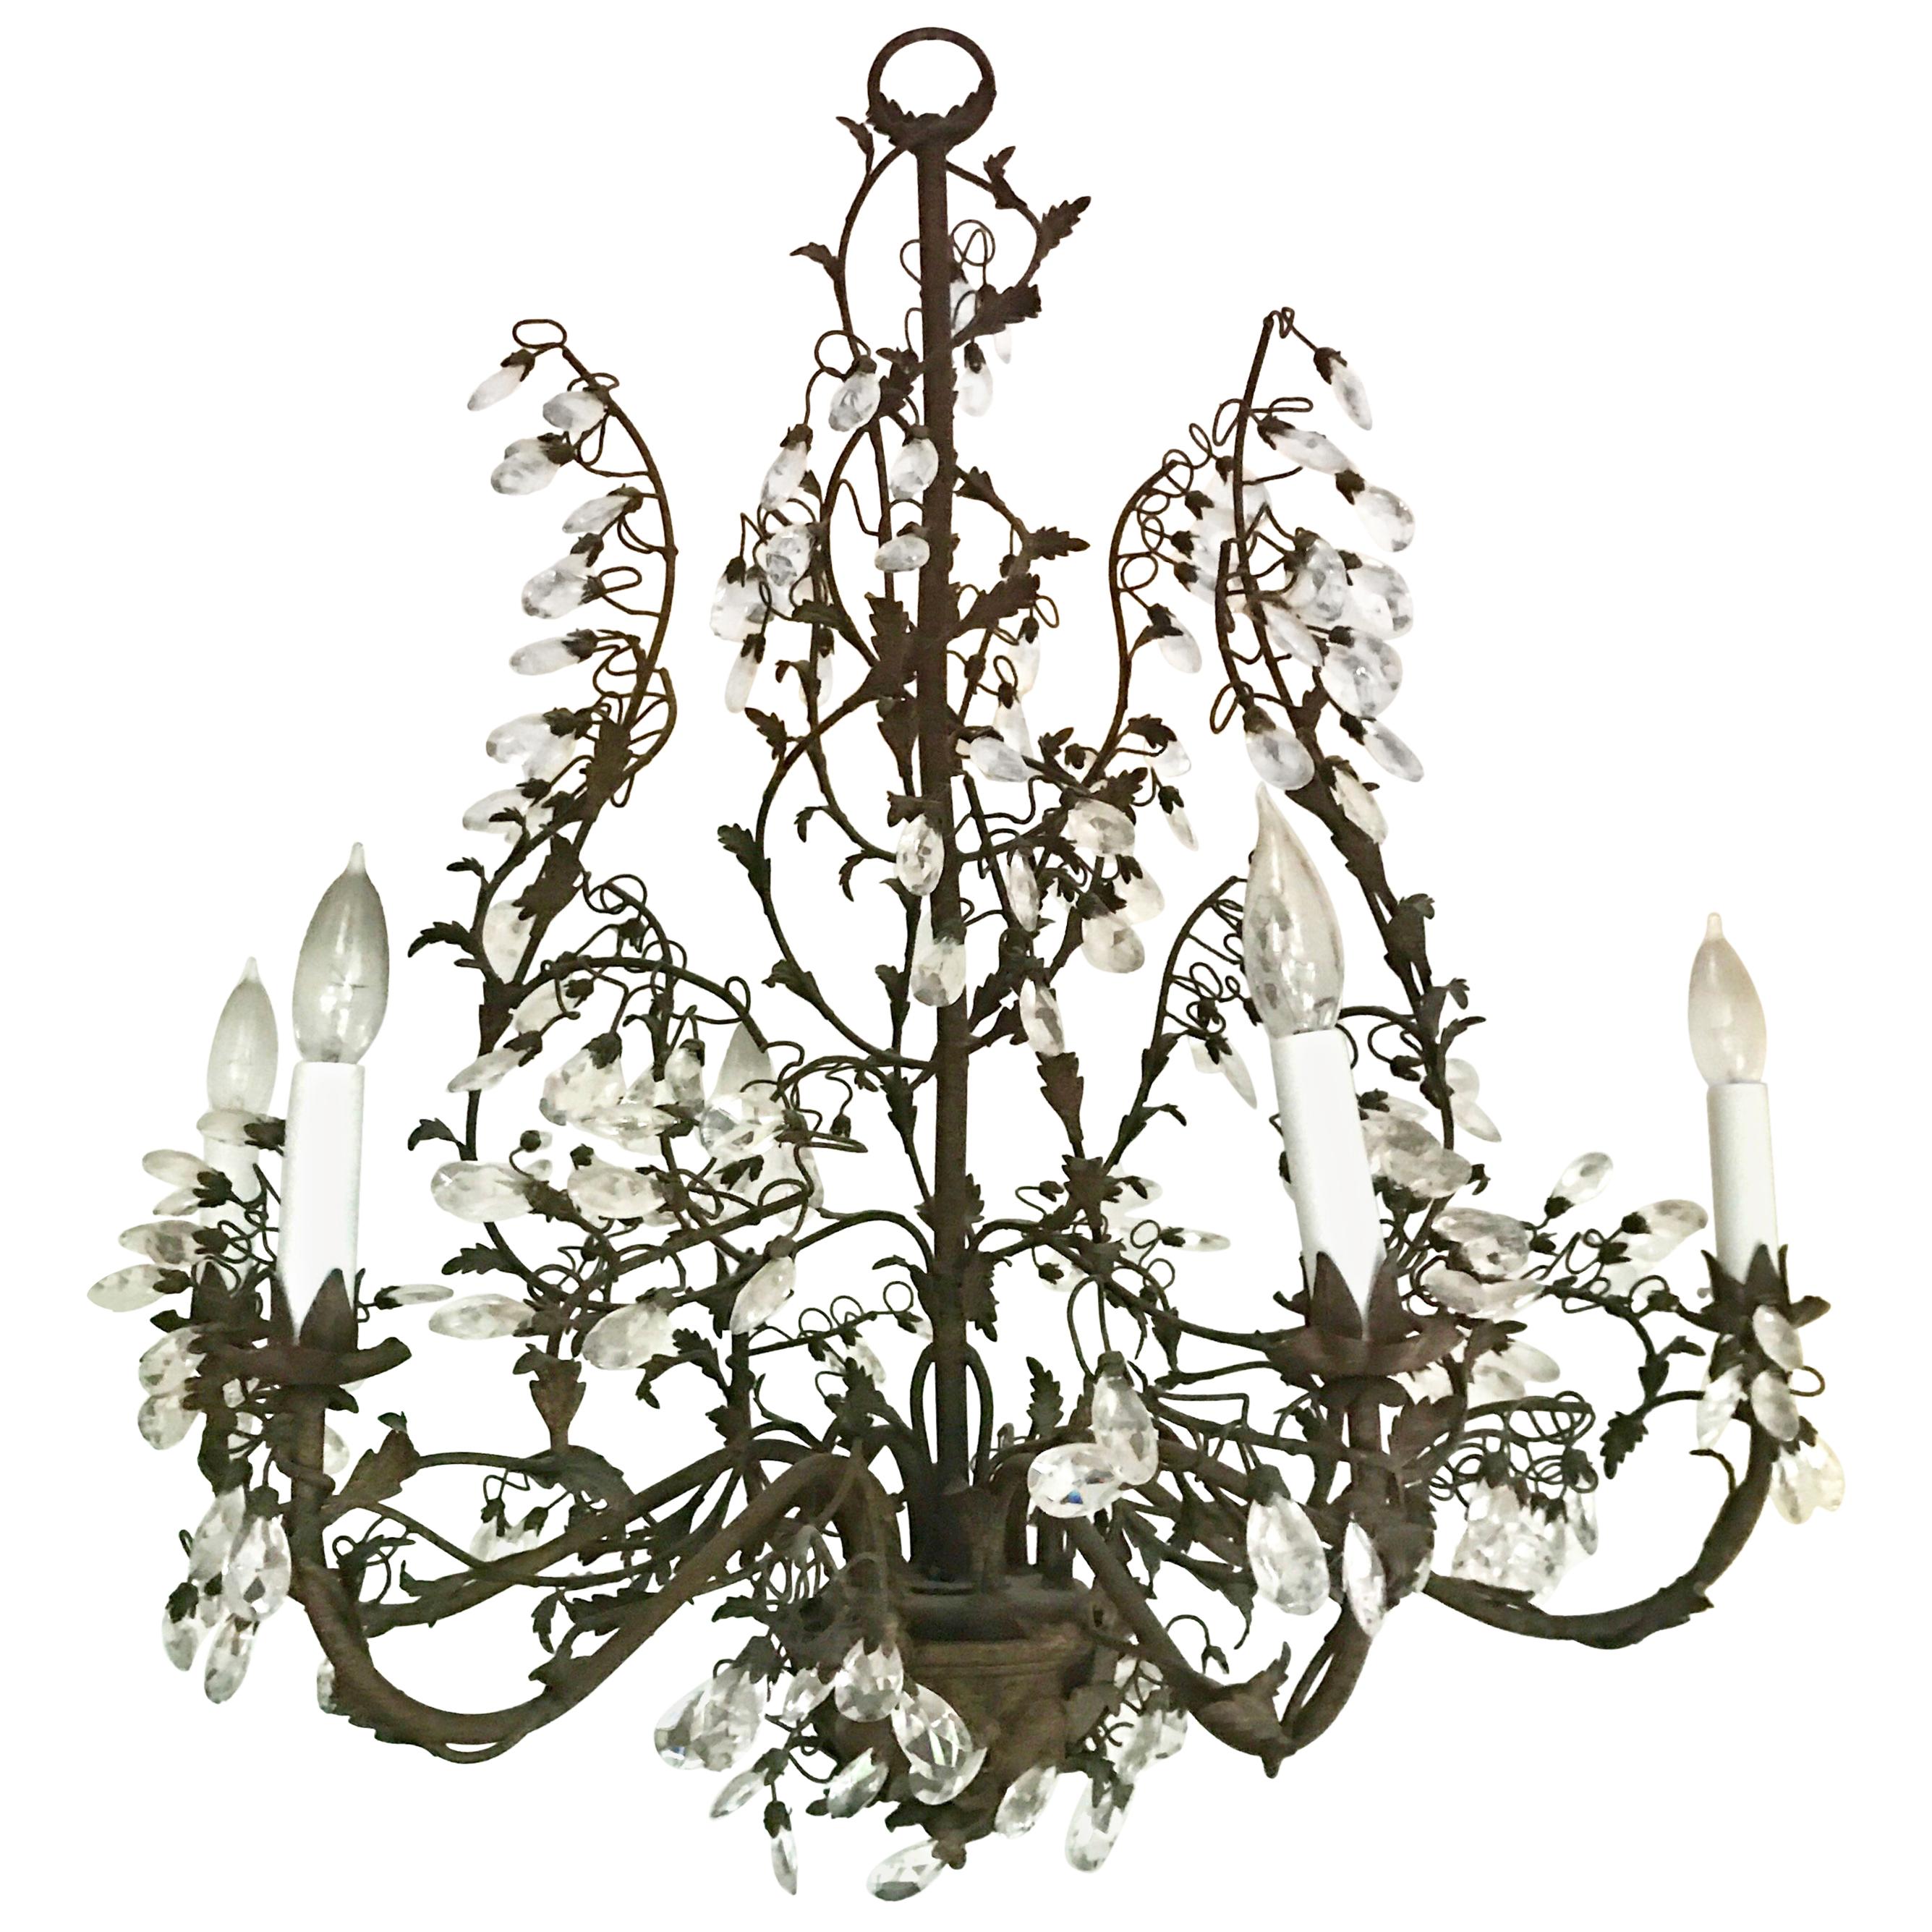 Large Made in Italy Crystal and Metal Tole Six-Light Vine Chandelier